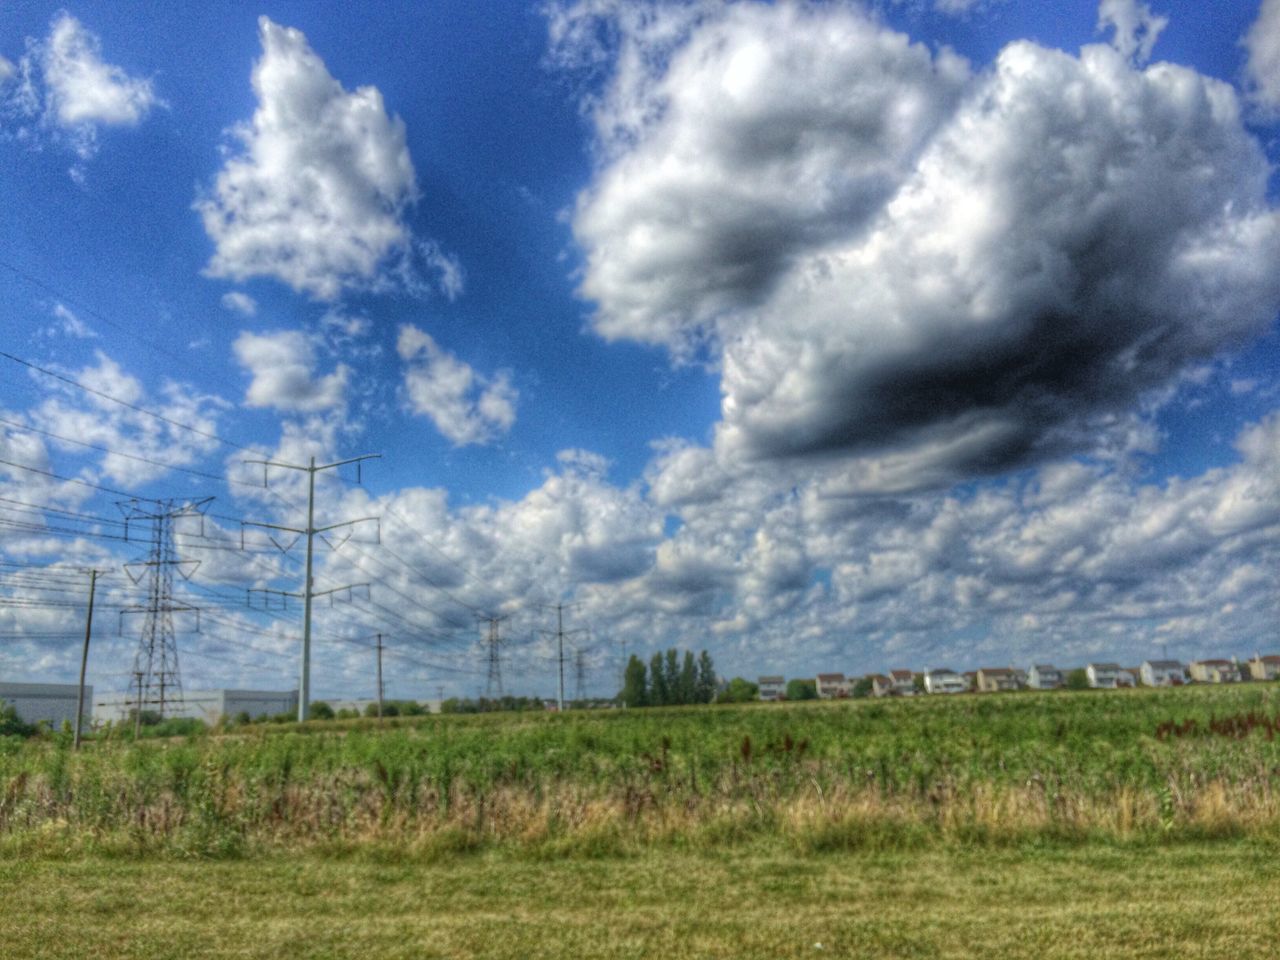 field, sky, landscape, grass, cloud - sky, electricity pylon, rural scene, tranquil scene, tranquility, fuel and power generation, agriculture, power line, nature, cloud, farm, cloudy, scenics, electricity, beauty in nature, growth